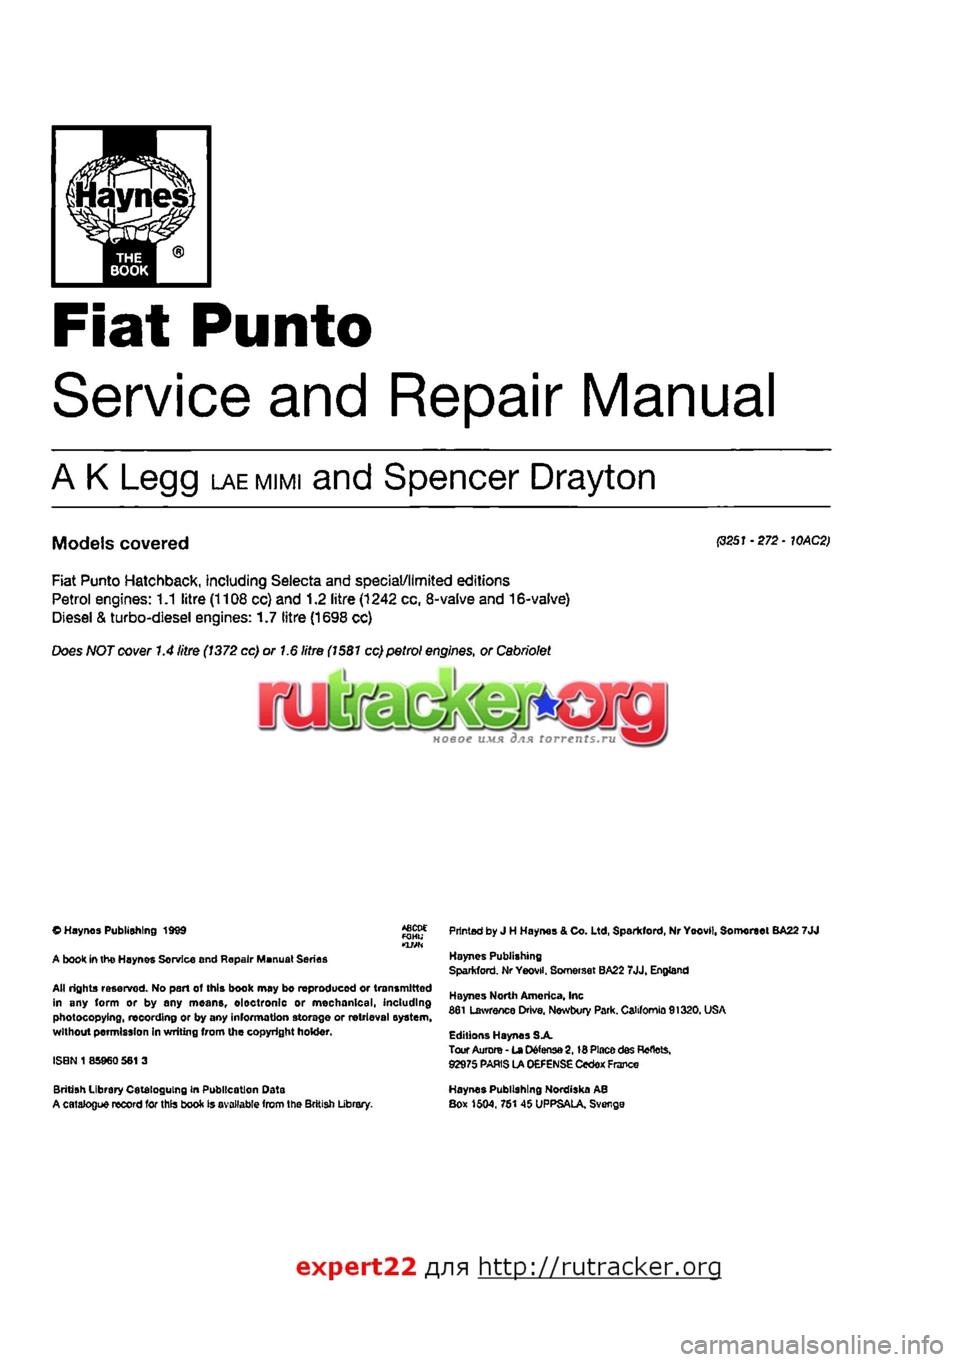 FIAT PUNTO 1994 176 / 1.G Workshop Manual 
Fiat Punto 
Service and Repair Manual 
A K Legg LAEMIMI and Spencer Drayton 
Models covered P251 •272 • WAC2> 
Fiat Punto Hatchback, including Selecta and special/limited editions Petrol engines: